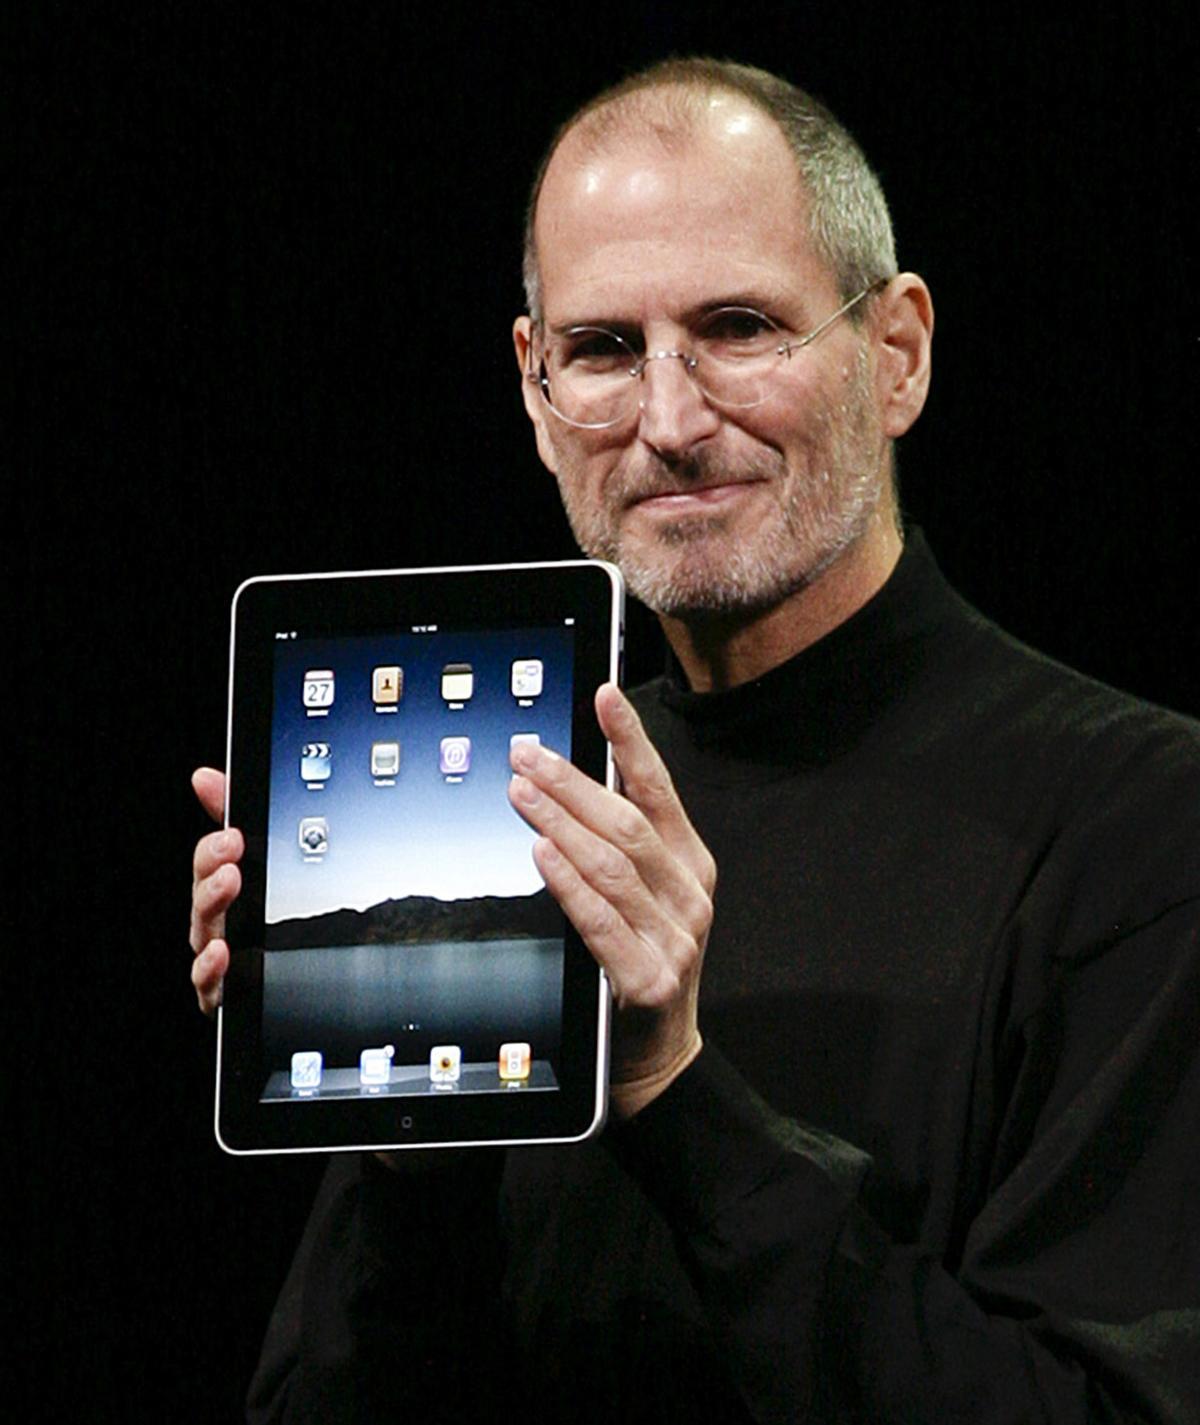 Apple’s Jobs was open to making a smaller iPad